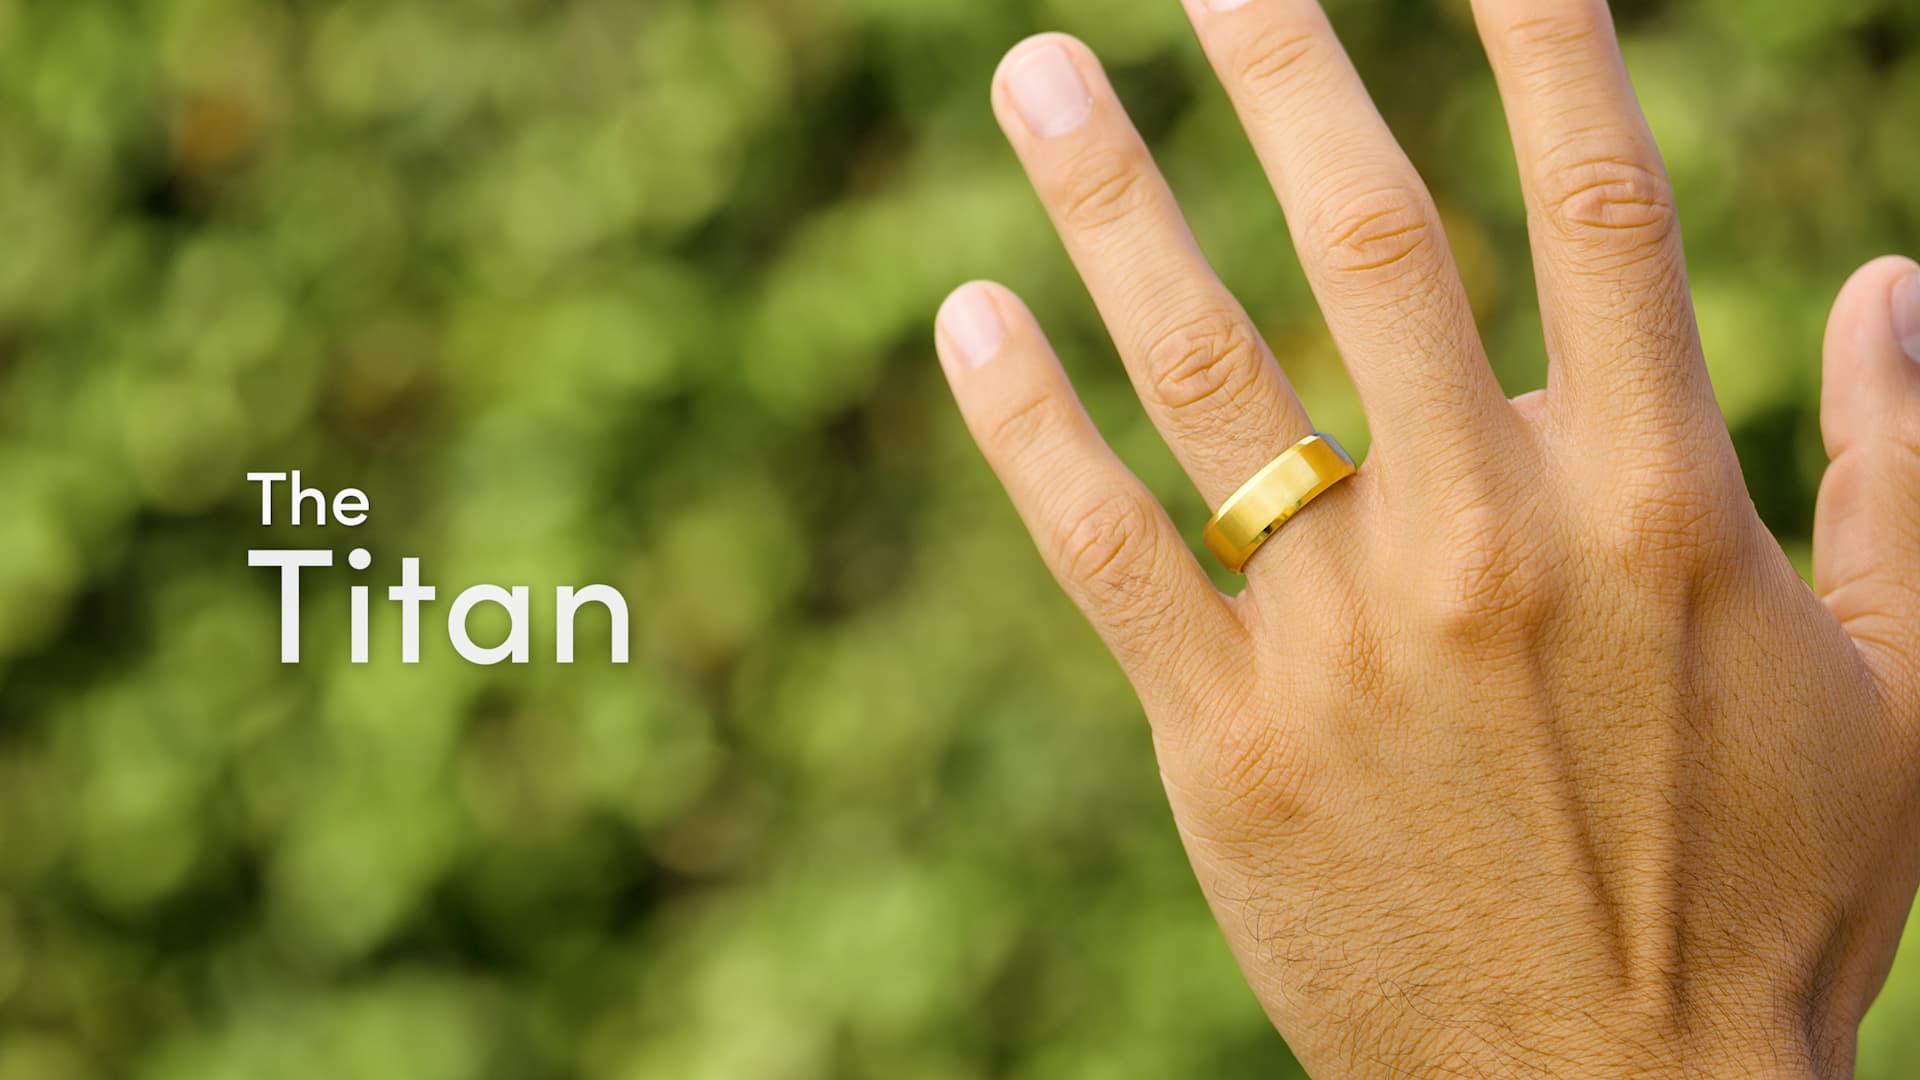 How Europeans wear wedding rings, and what it says about them - Big Think